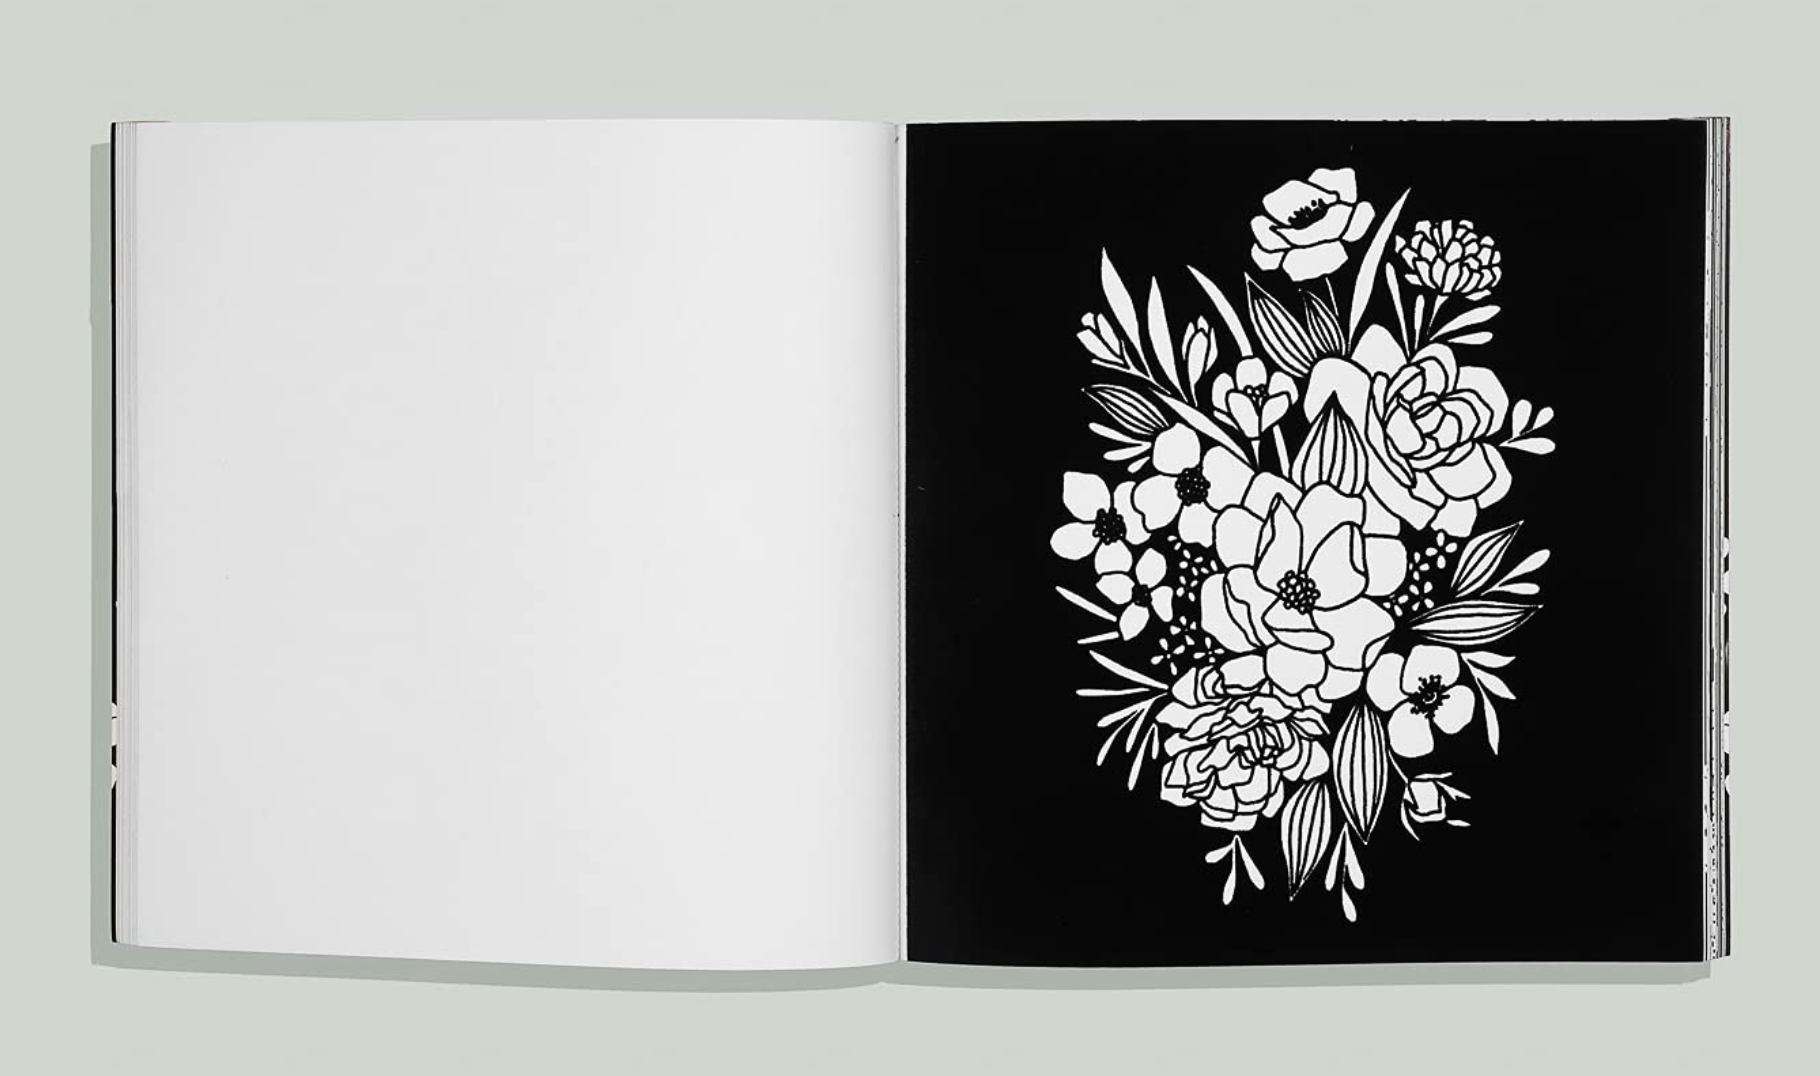 Escape stress: Dive into serenity with Floral Adult Coloring Book & Colored Pencils